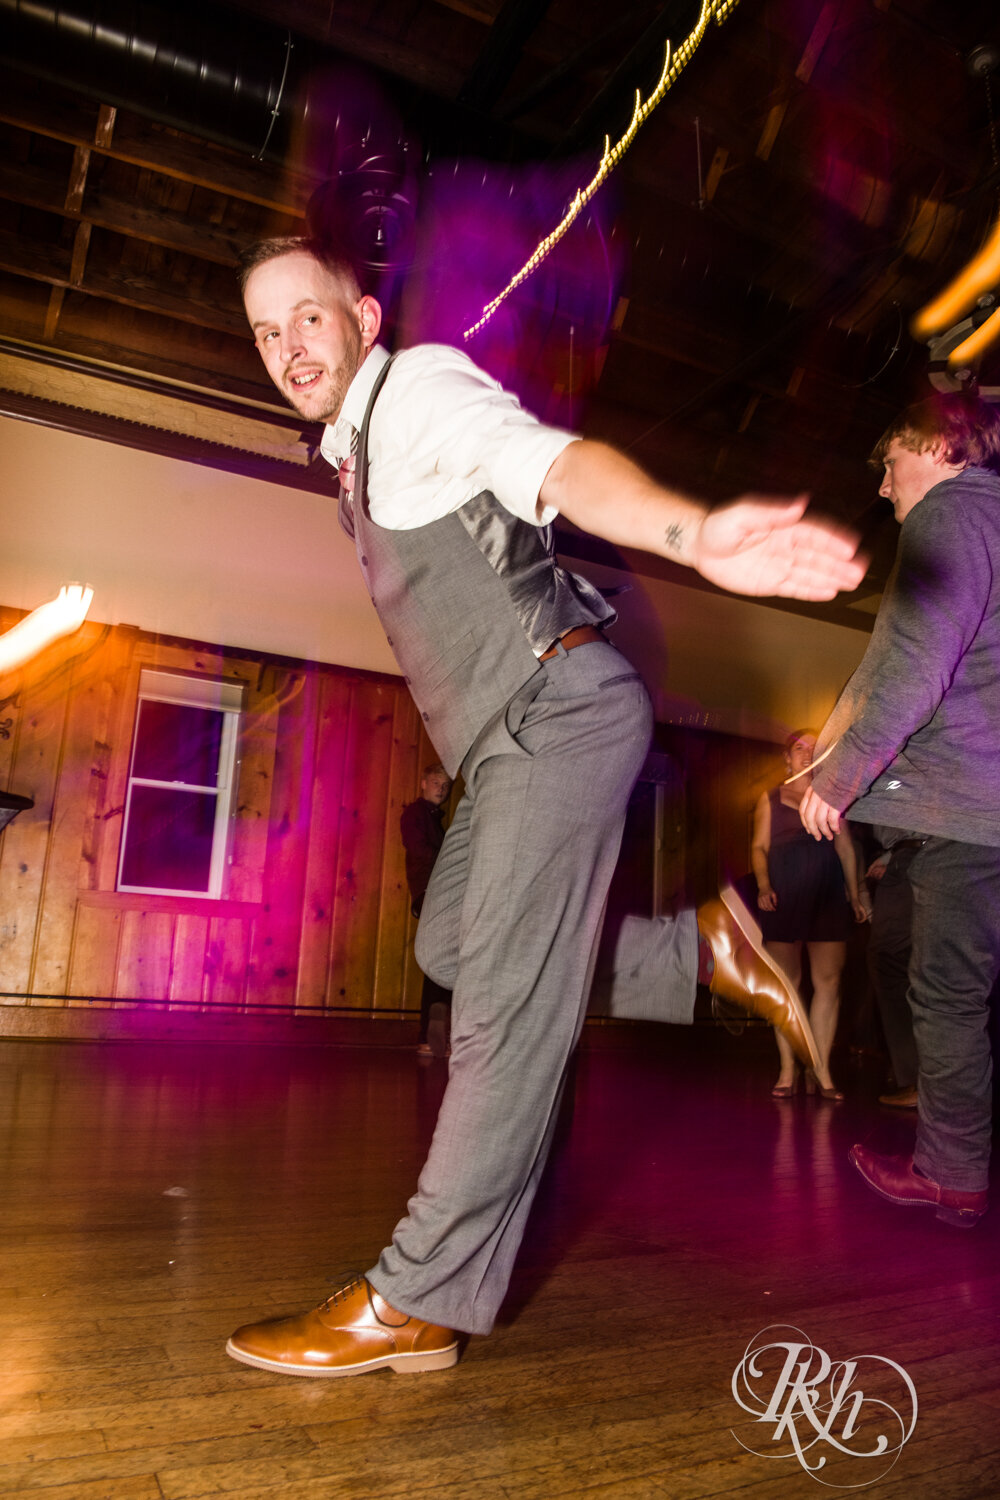 Bride and groom dance with guests at wedding reception at Kellerman's Event Center in White Bear Lake, Minnesota.